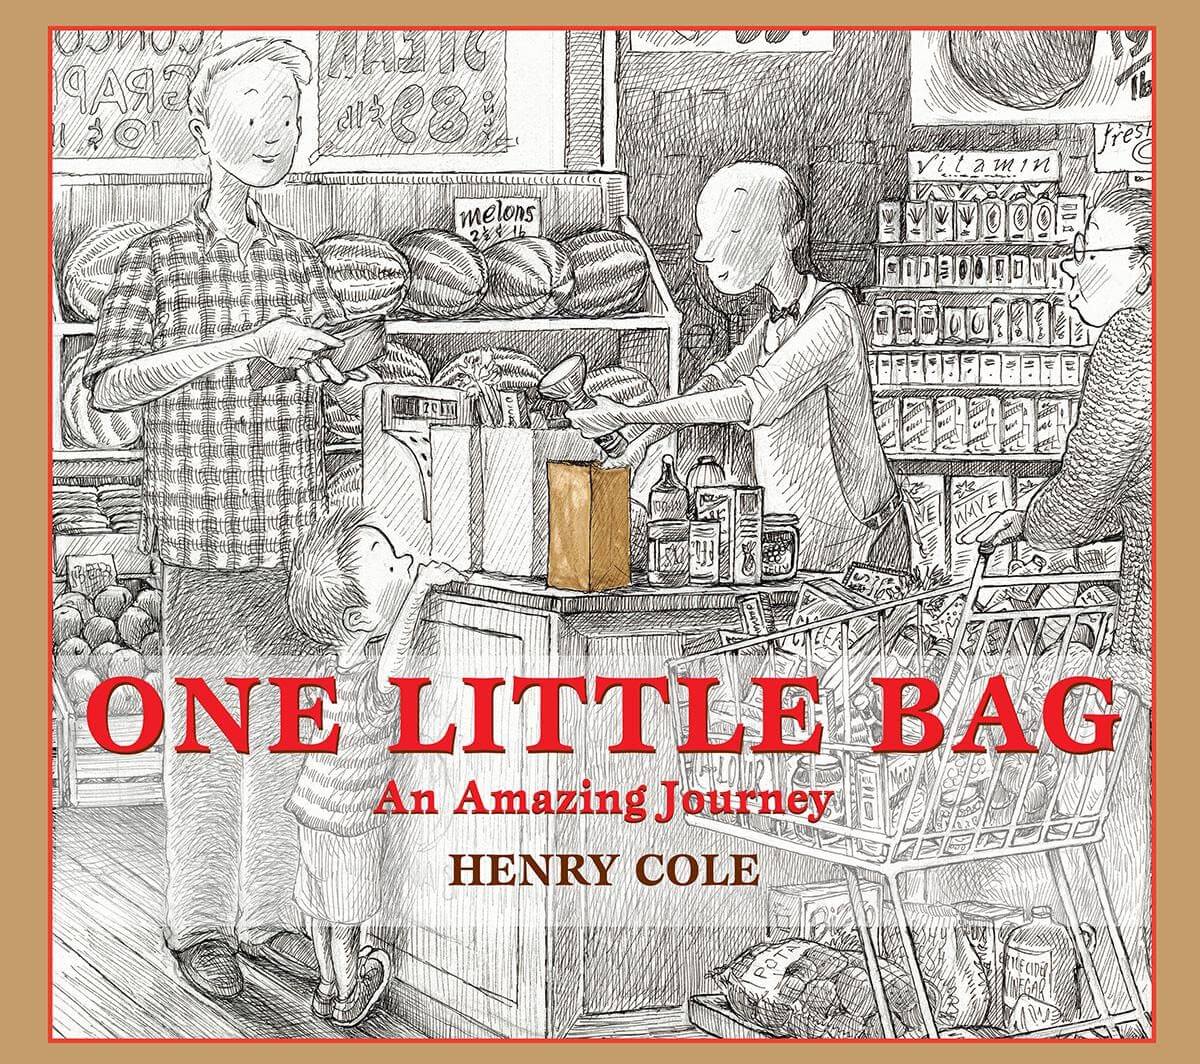 One little bag: An amazing journey by Henry Cole 